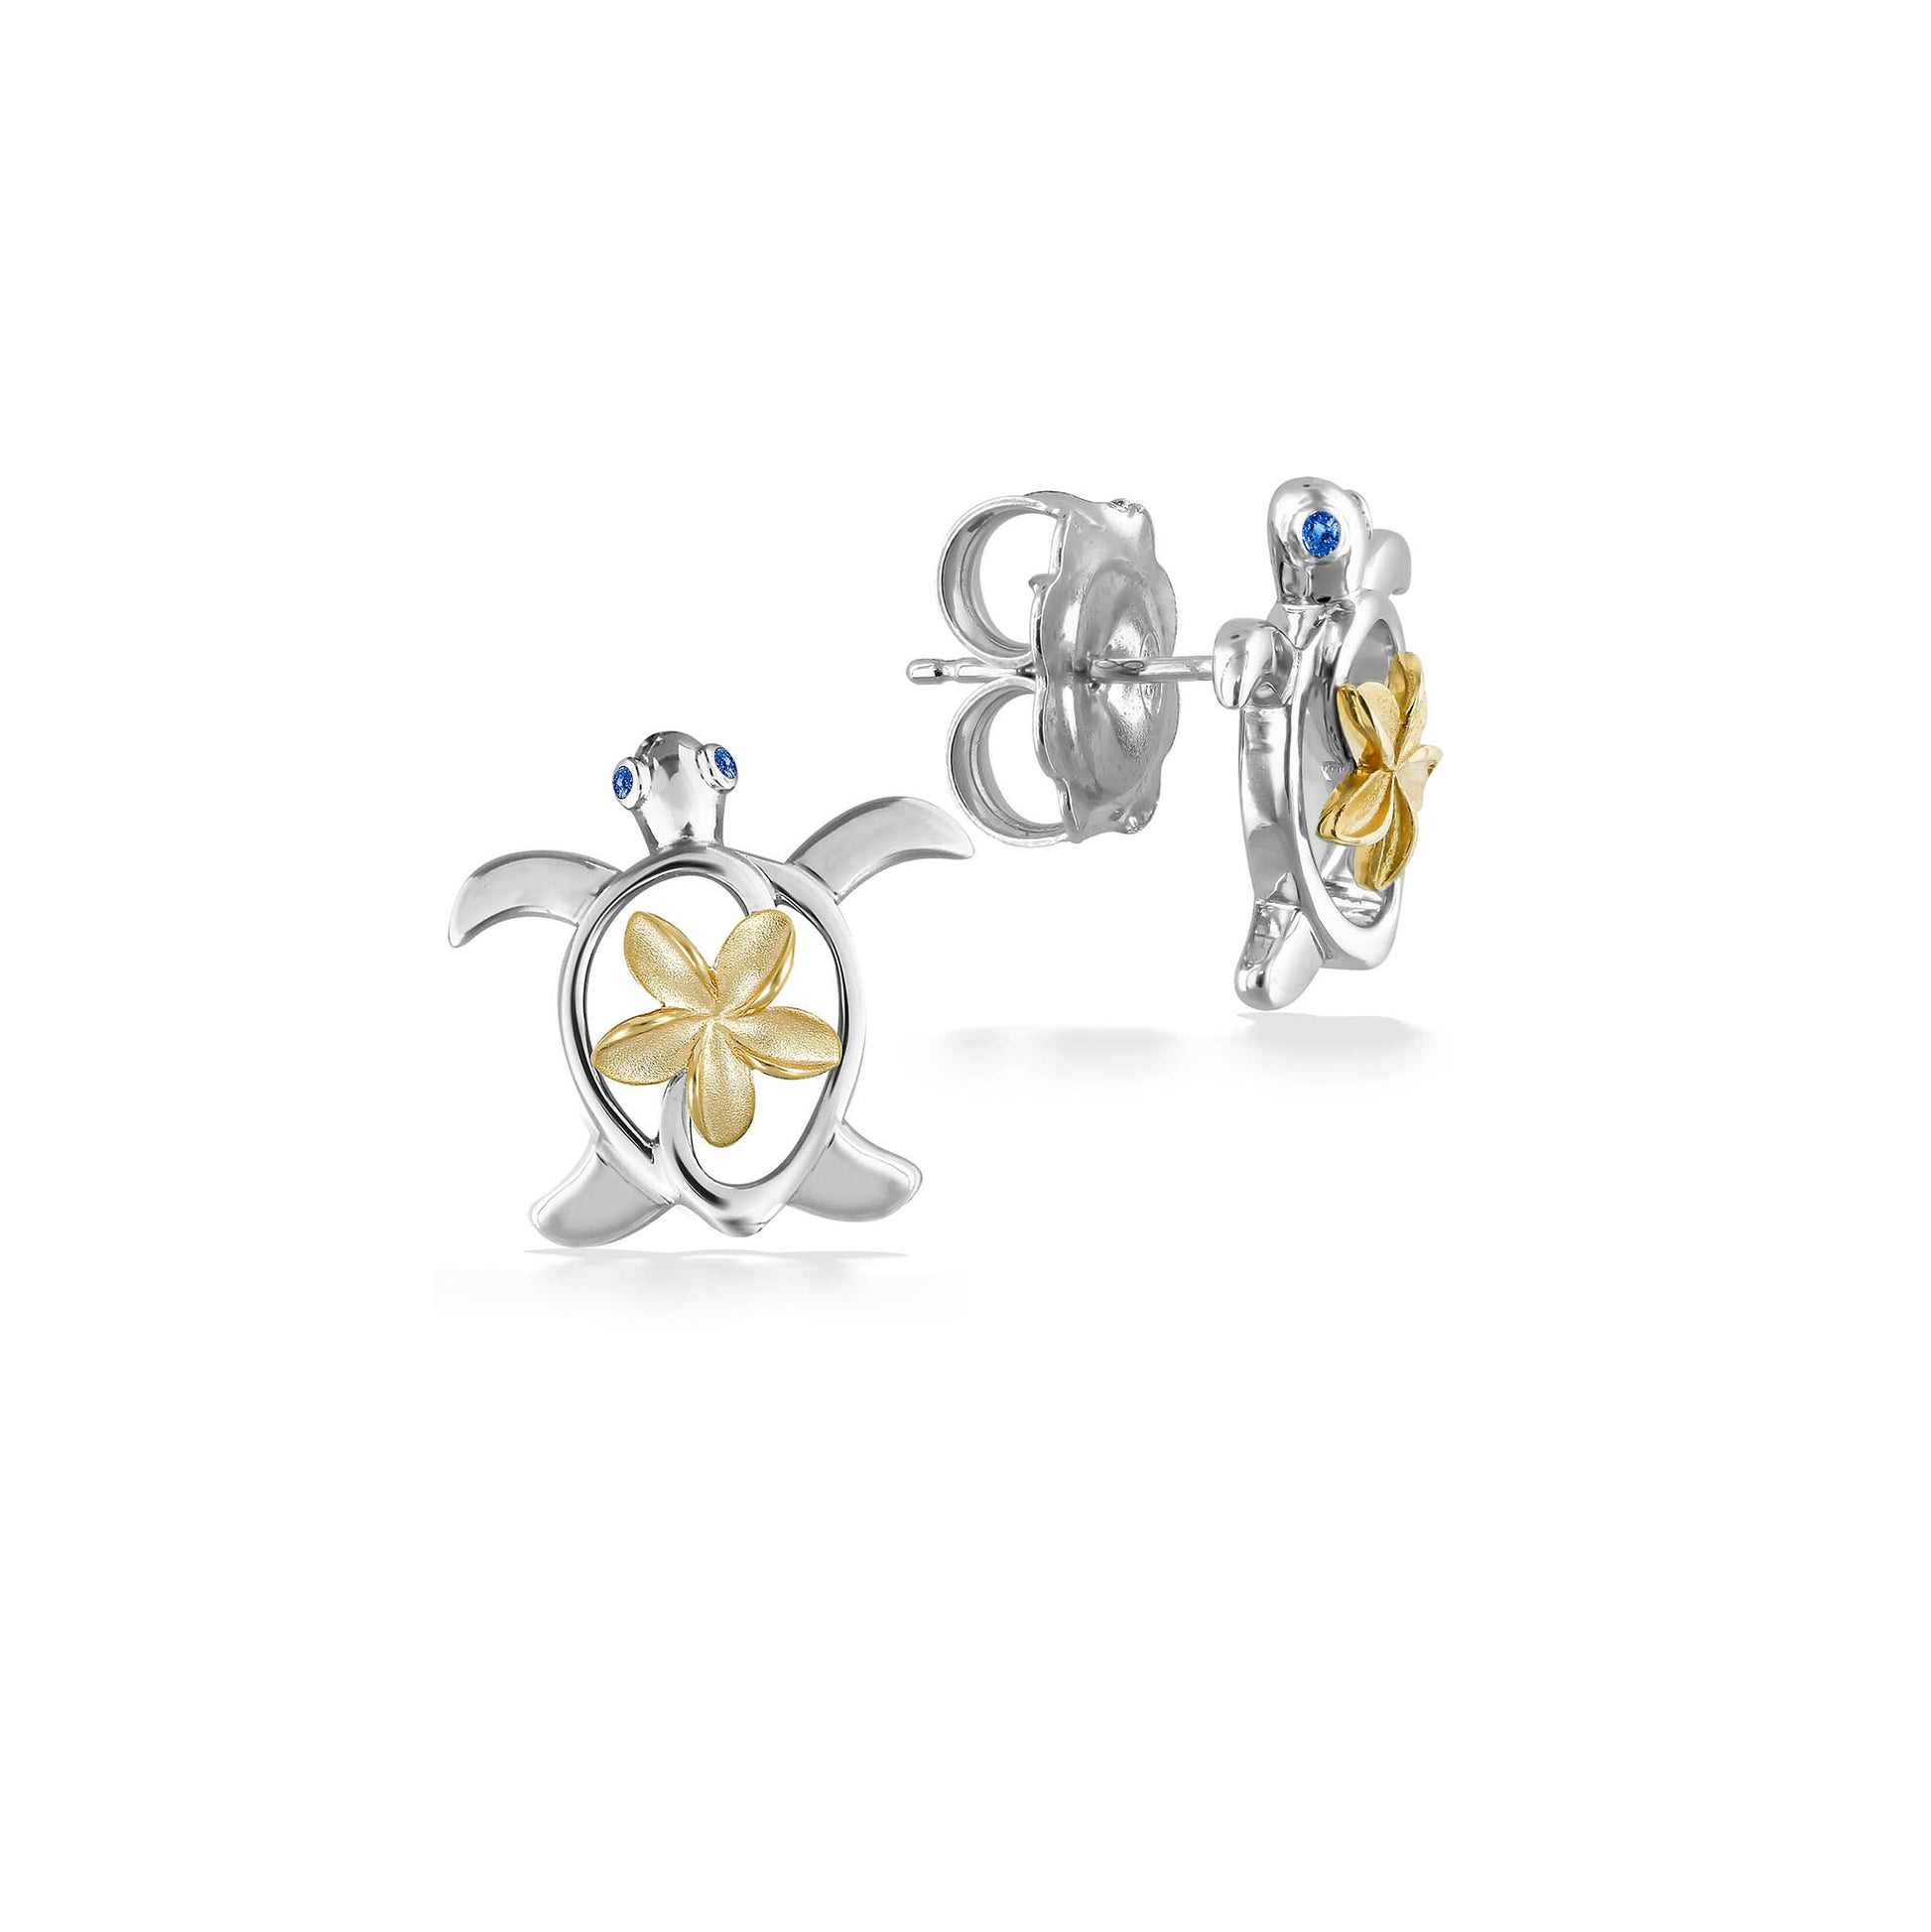 44391 - 14K Yellow Gold and Sterling Silver - Honu and Plumeria Stud Earrings